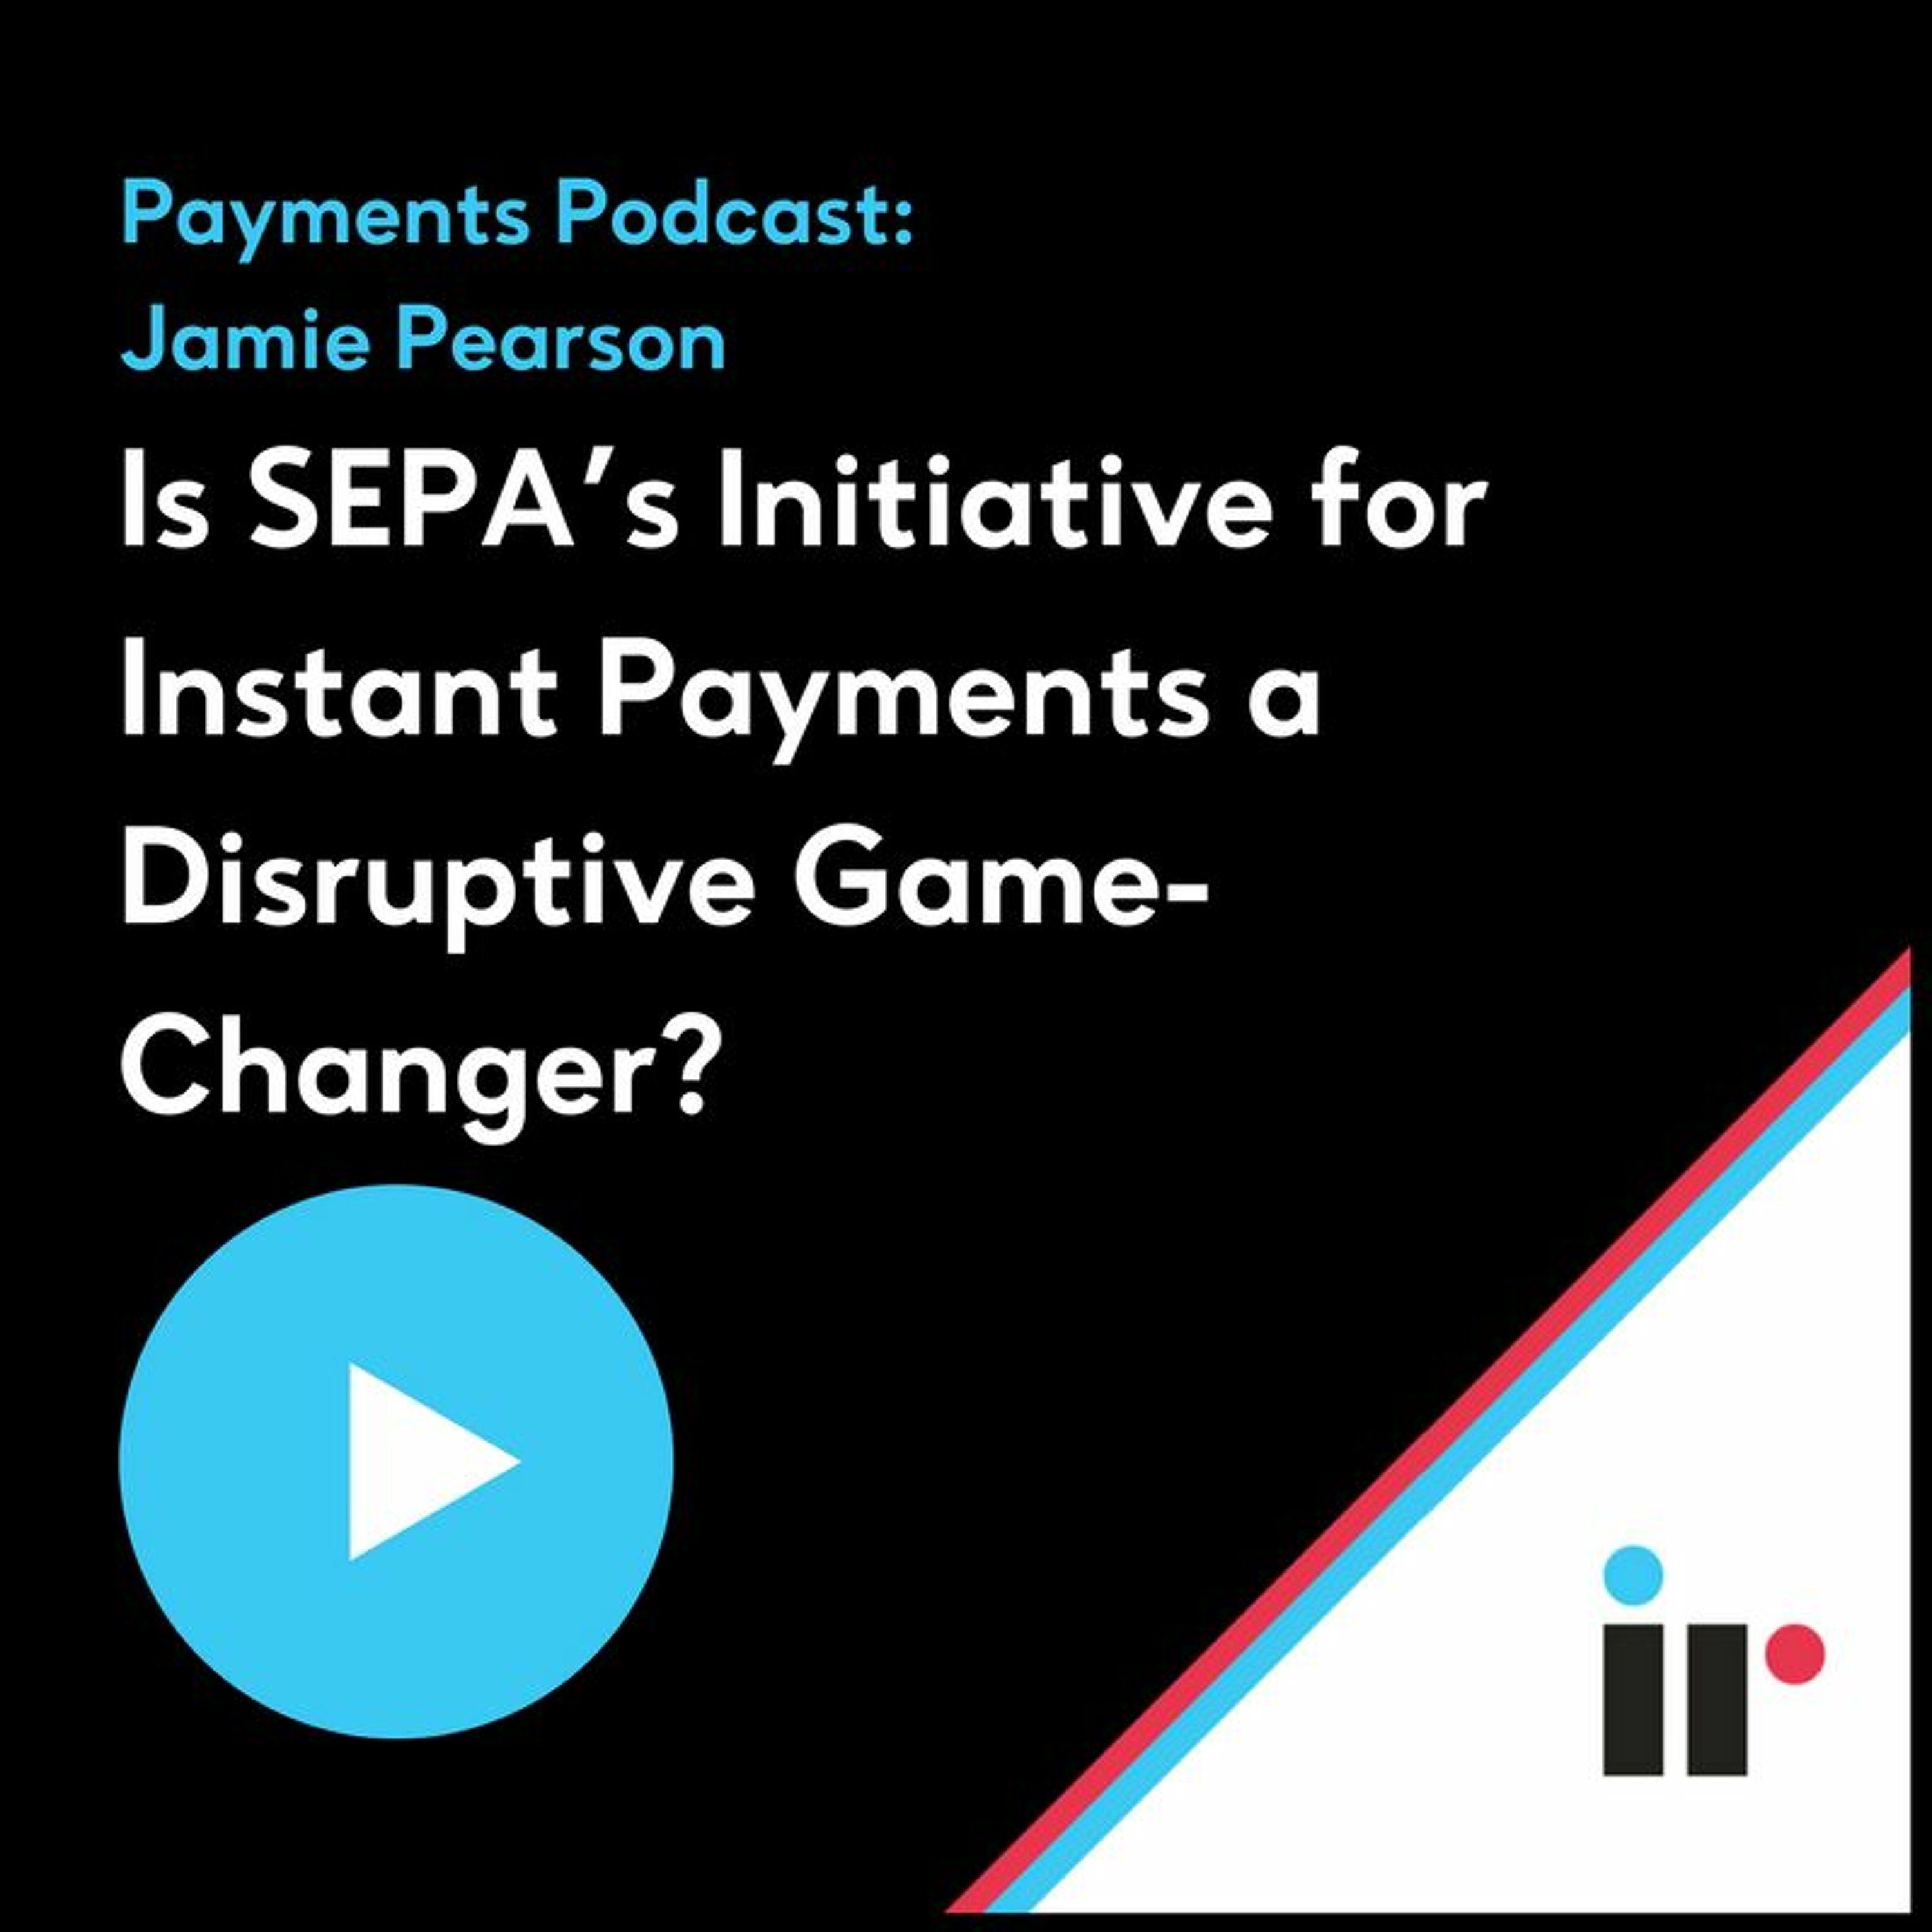 Is SEPA’s Initiative for Instant Payments a Disruptive Game-Changer?